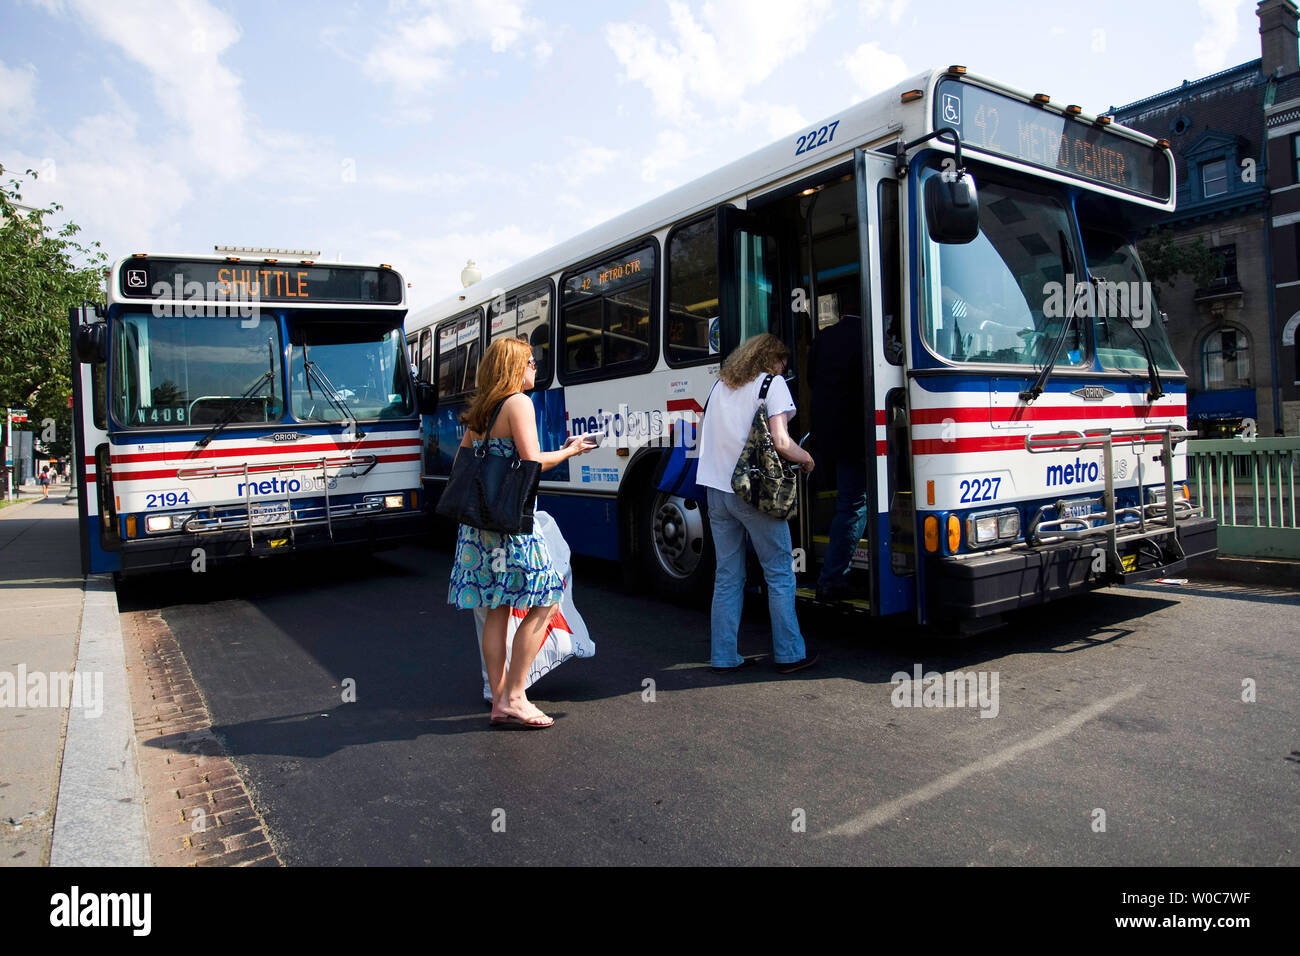 People board shuttle buses after the Dupont Metro Station was temporarily closed after a power outage in downtown Washington on June 13, 2008.  The power outage occurred during the morning rush hour causing major delays. (UPI Photo/Patrick D. McDermott) Stock Photo